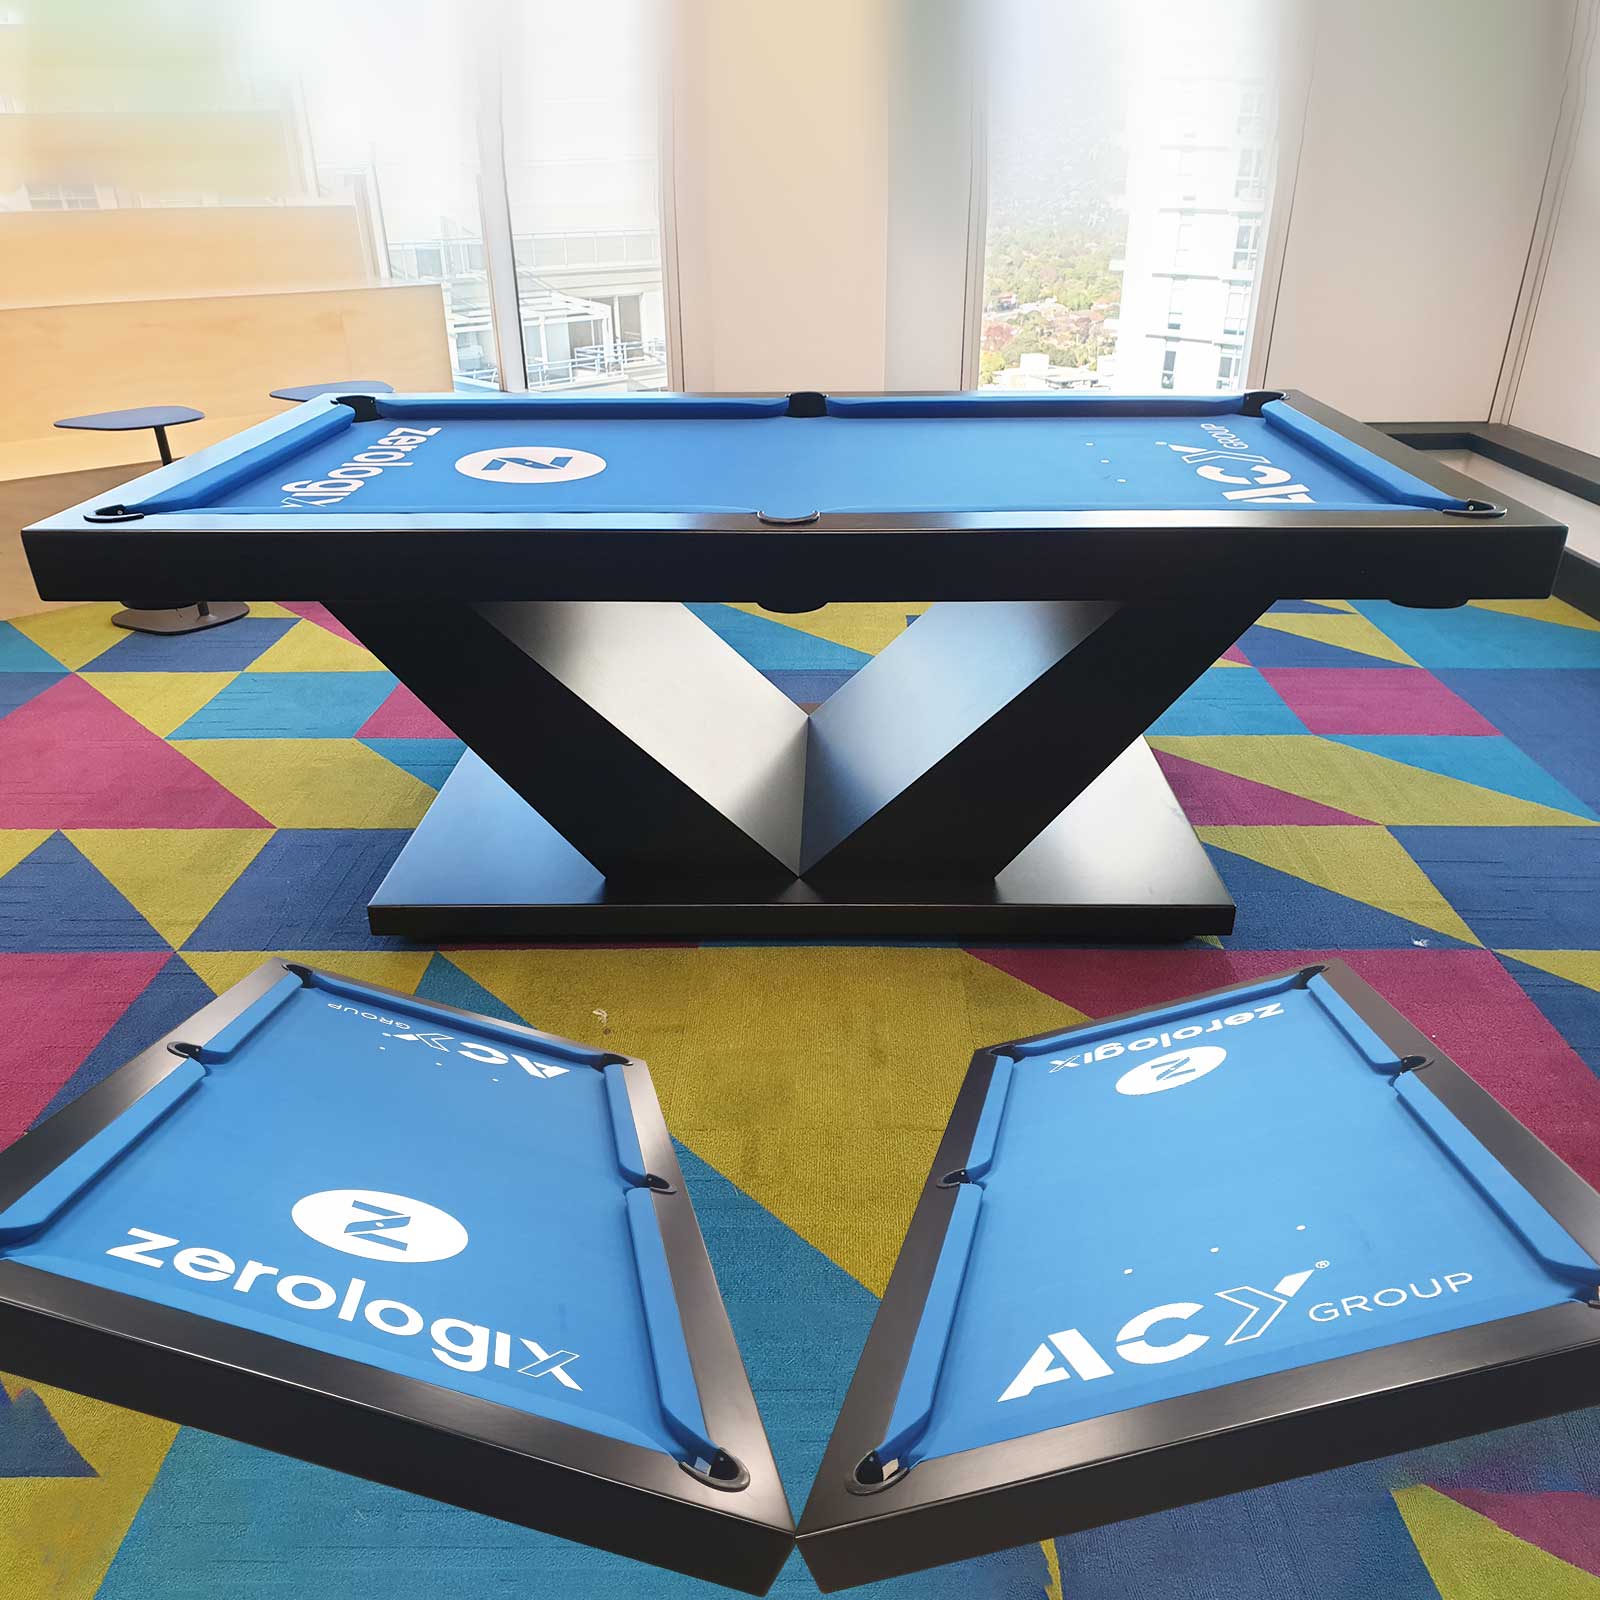 Customized Branded - Make the table with your own logo!